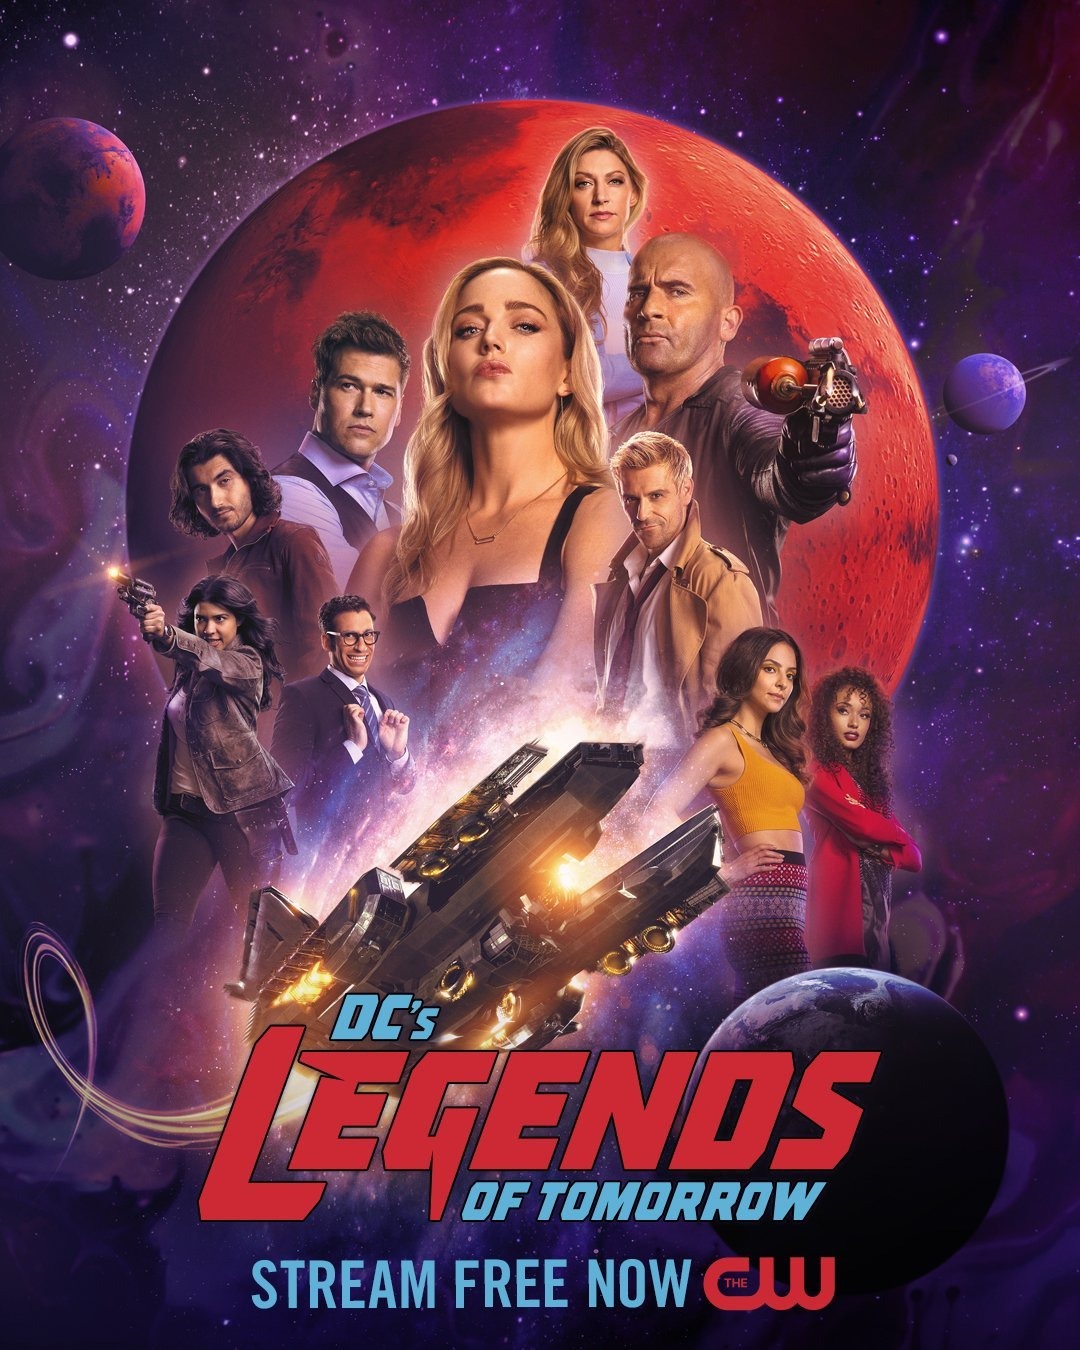 Legends Of Tomorrow Season 7 Episode 7 Release Date and More